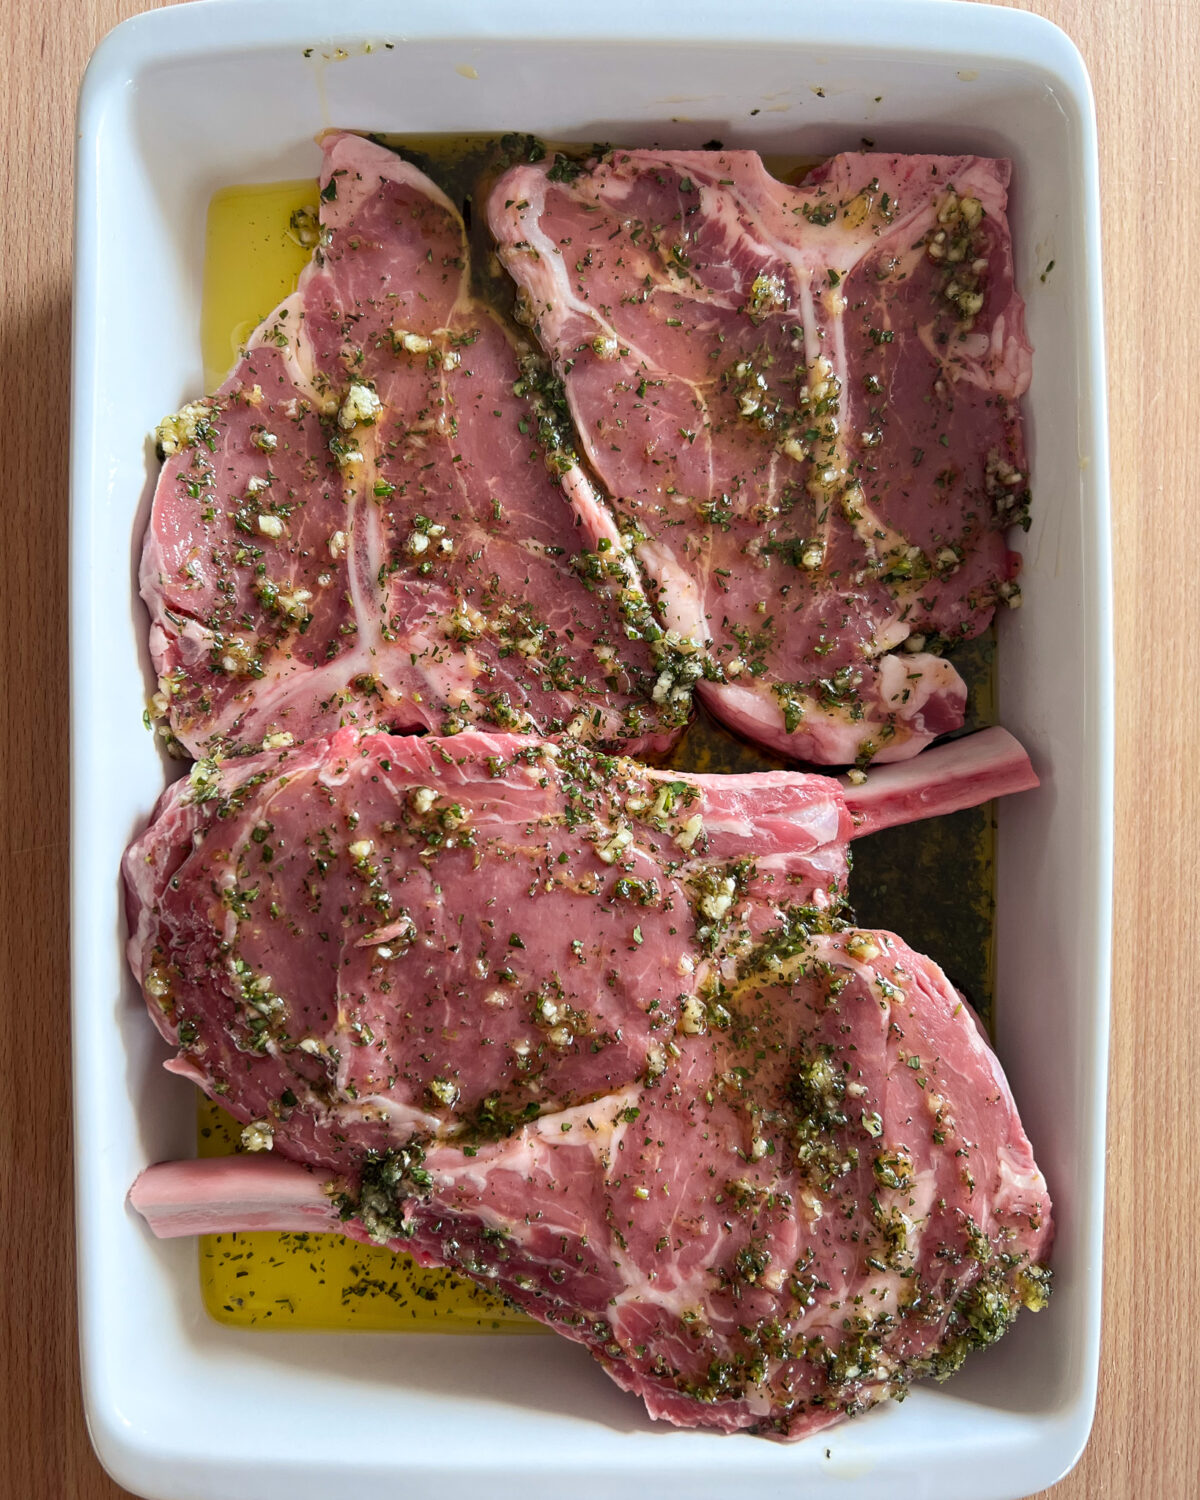 Four veal chops marinating in olive oil, chopped rosemary, chopped thyme, lemon zest, and garlic.